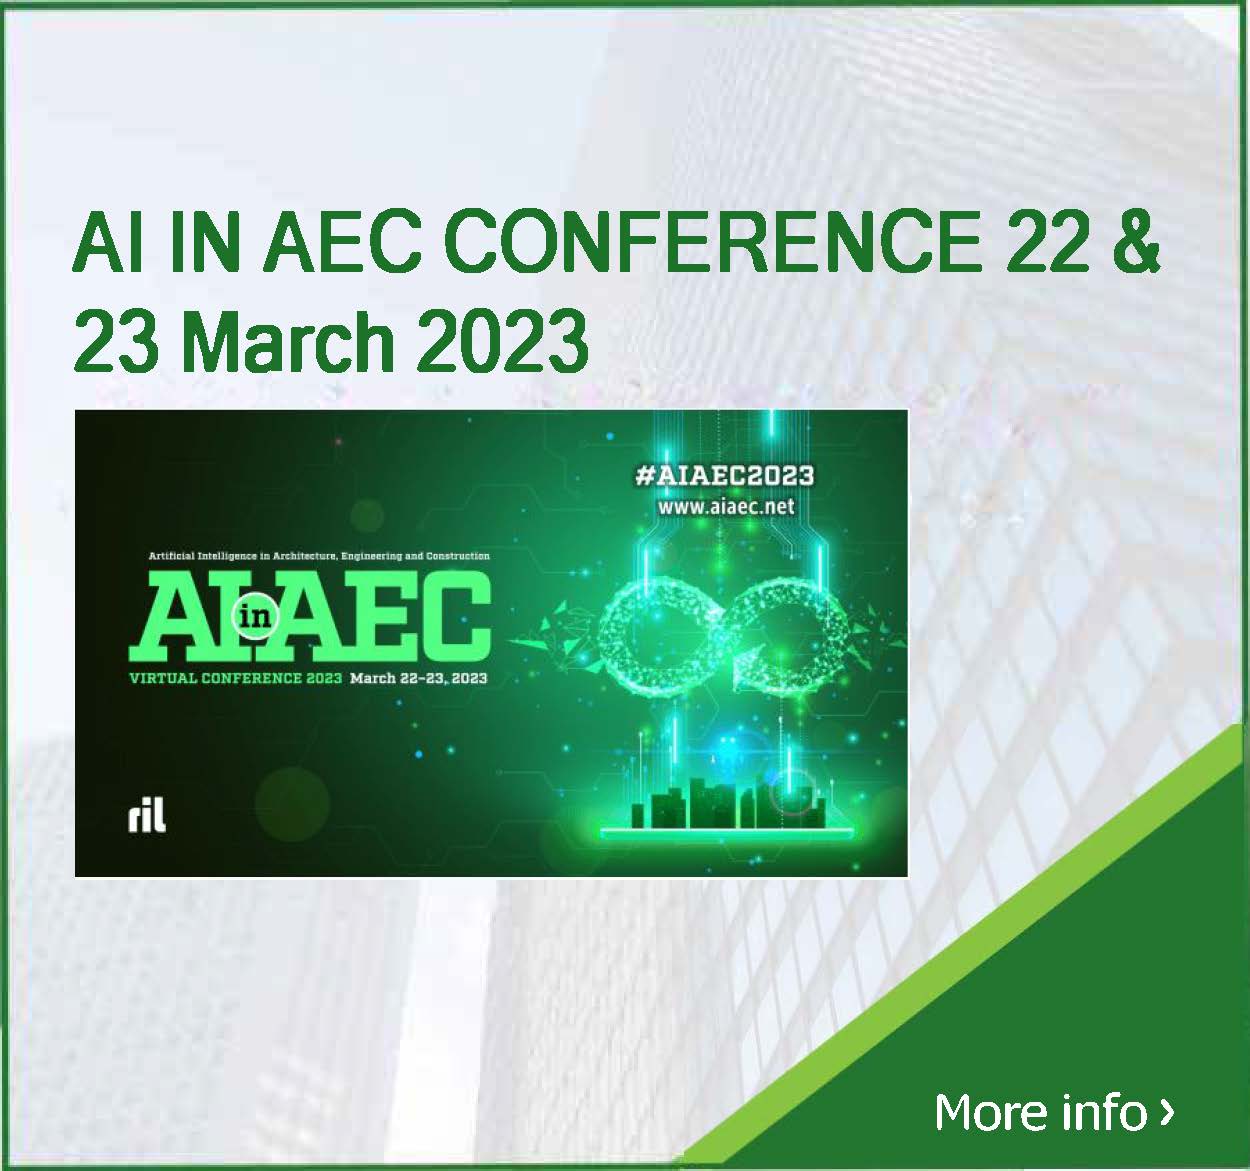 AI IN AEC CONFERENCE 22 & 23 March 2023